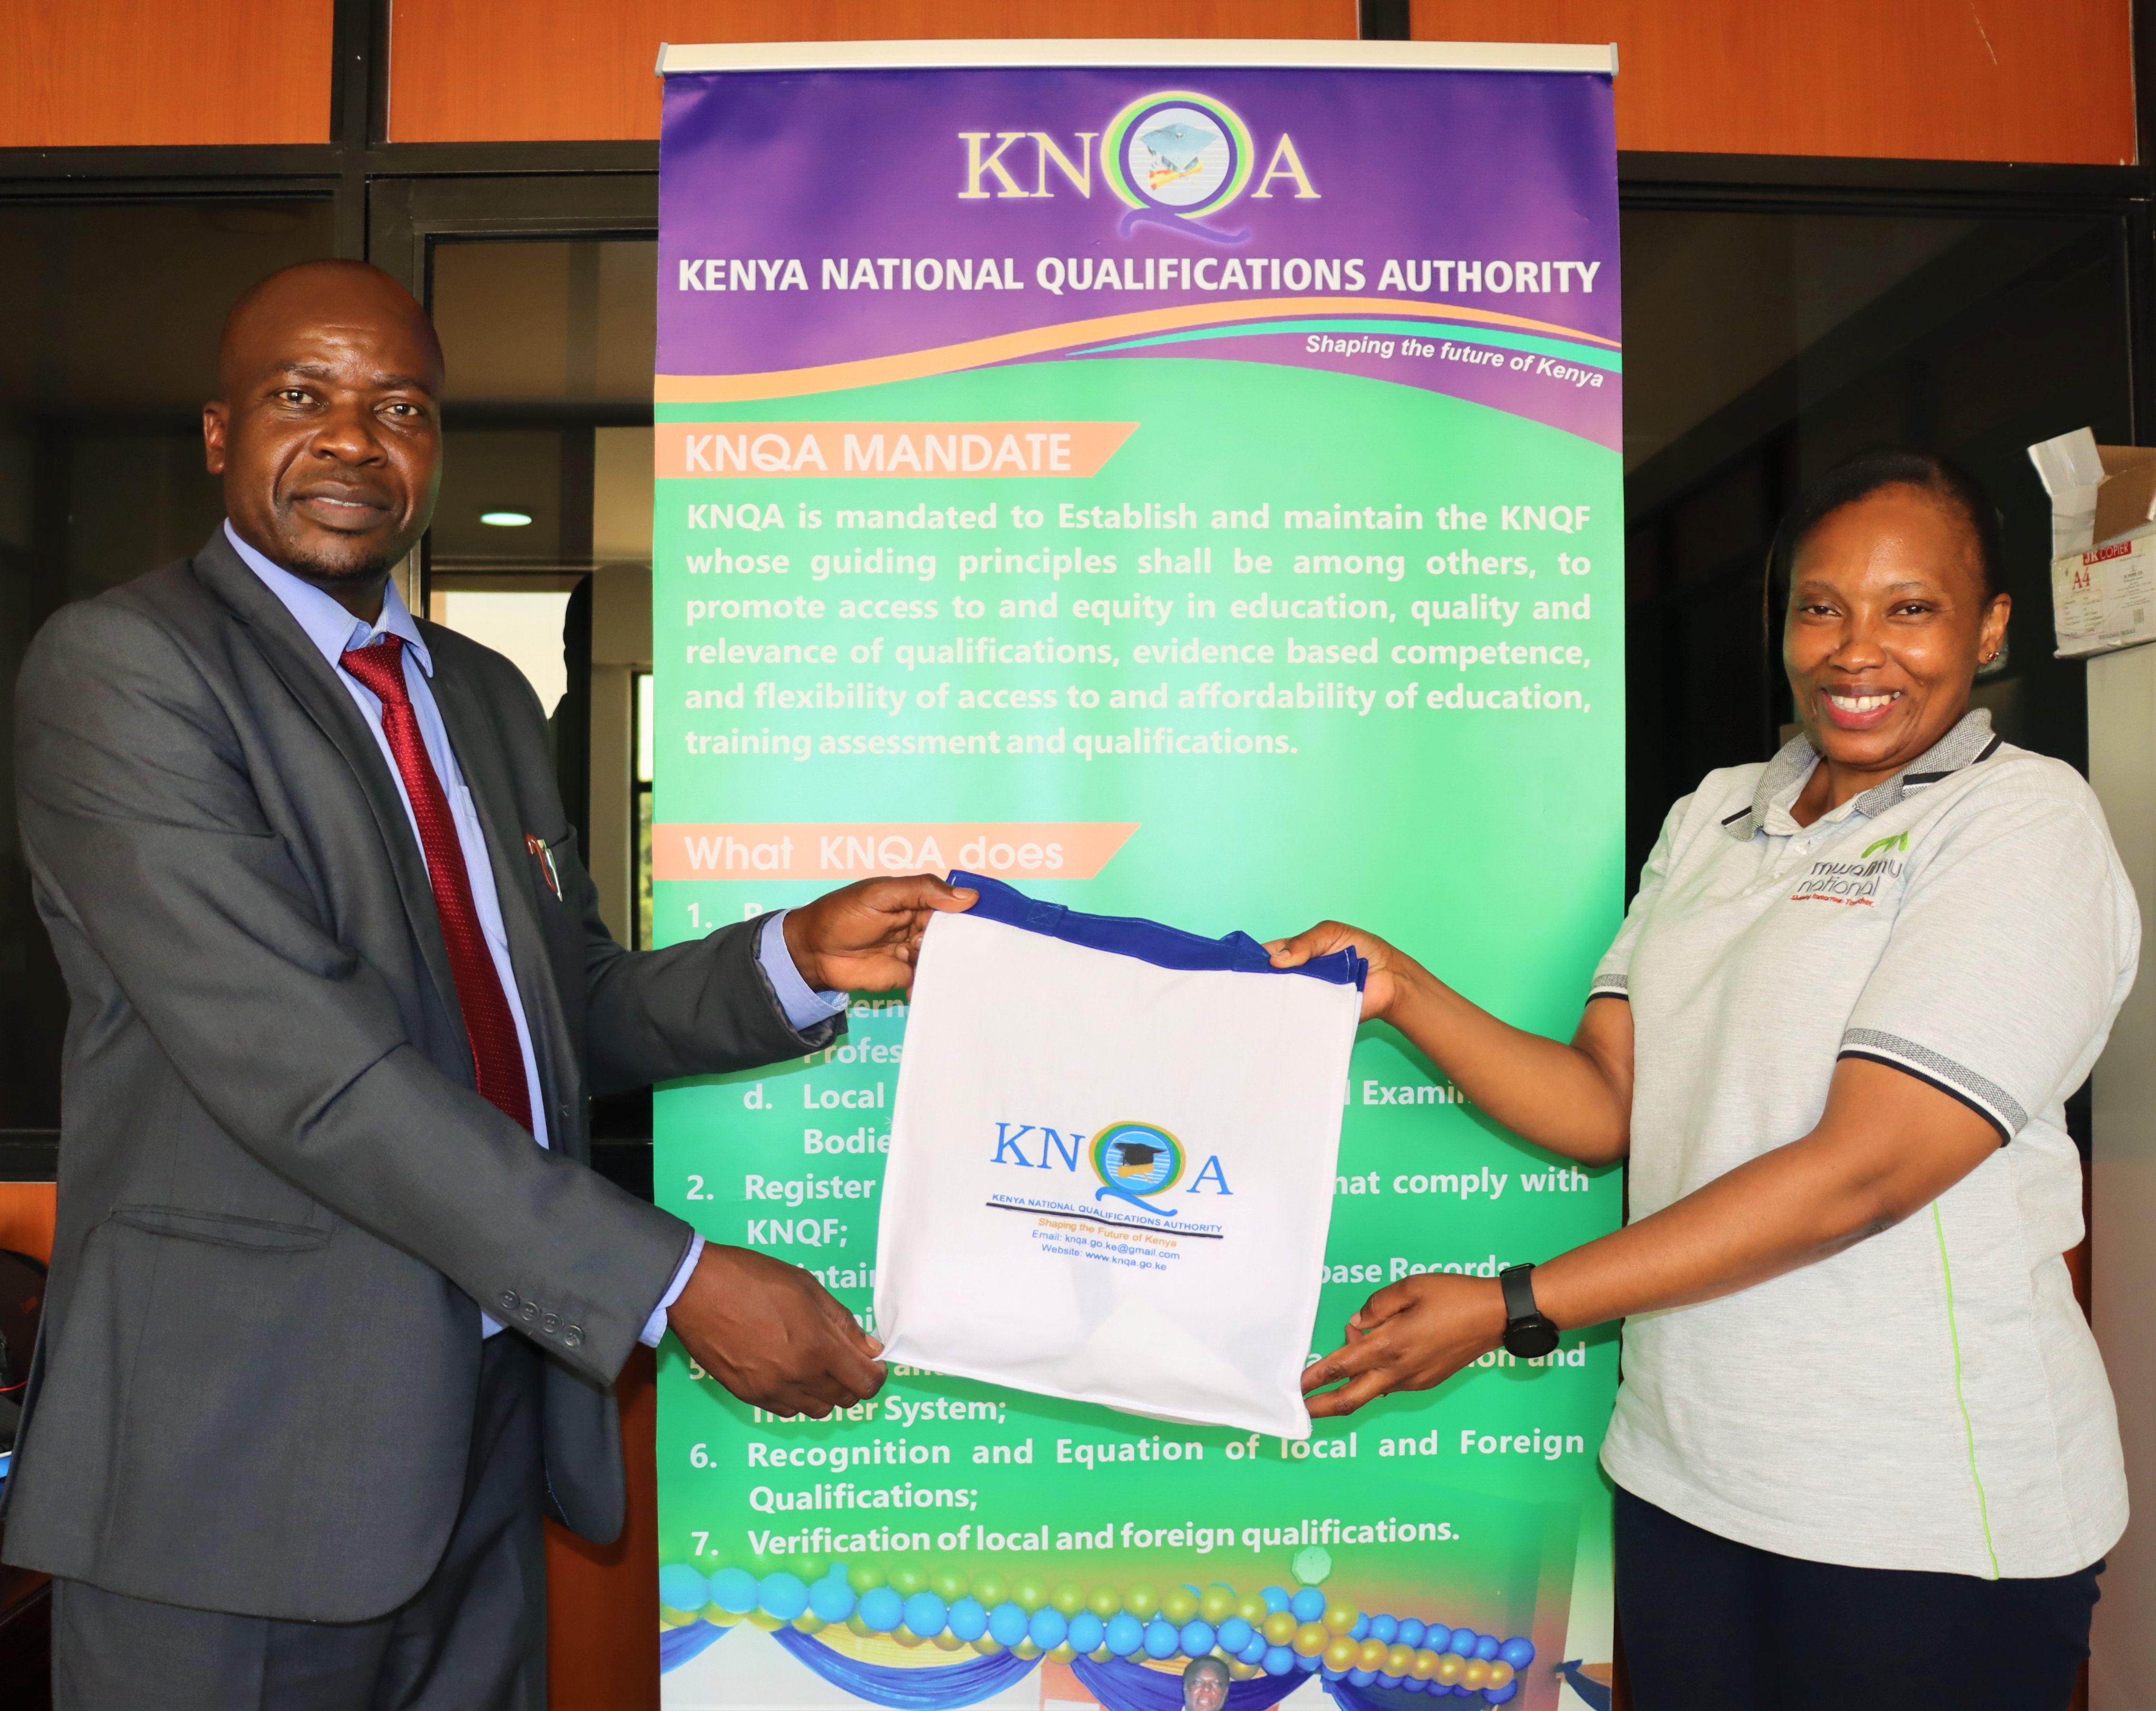 Director Technical Services Mr. Stanley Maindi, brands Ms. Purity Kimathi and Ms. Gladys Mwangi – both branch managers of Mwalimu National Sacco in KNQA regalia during a courtesy call at the Authority’s offices.